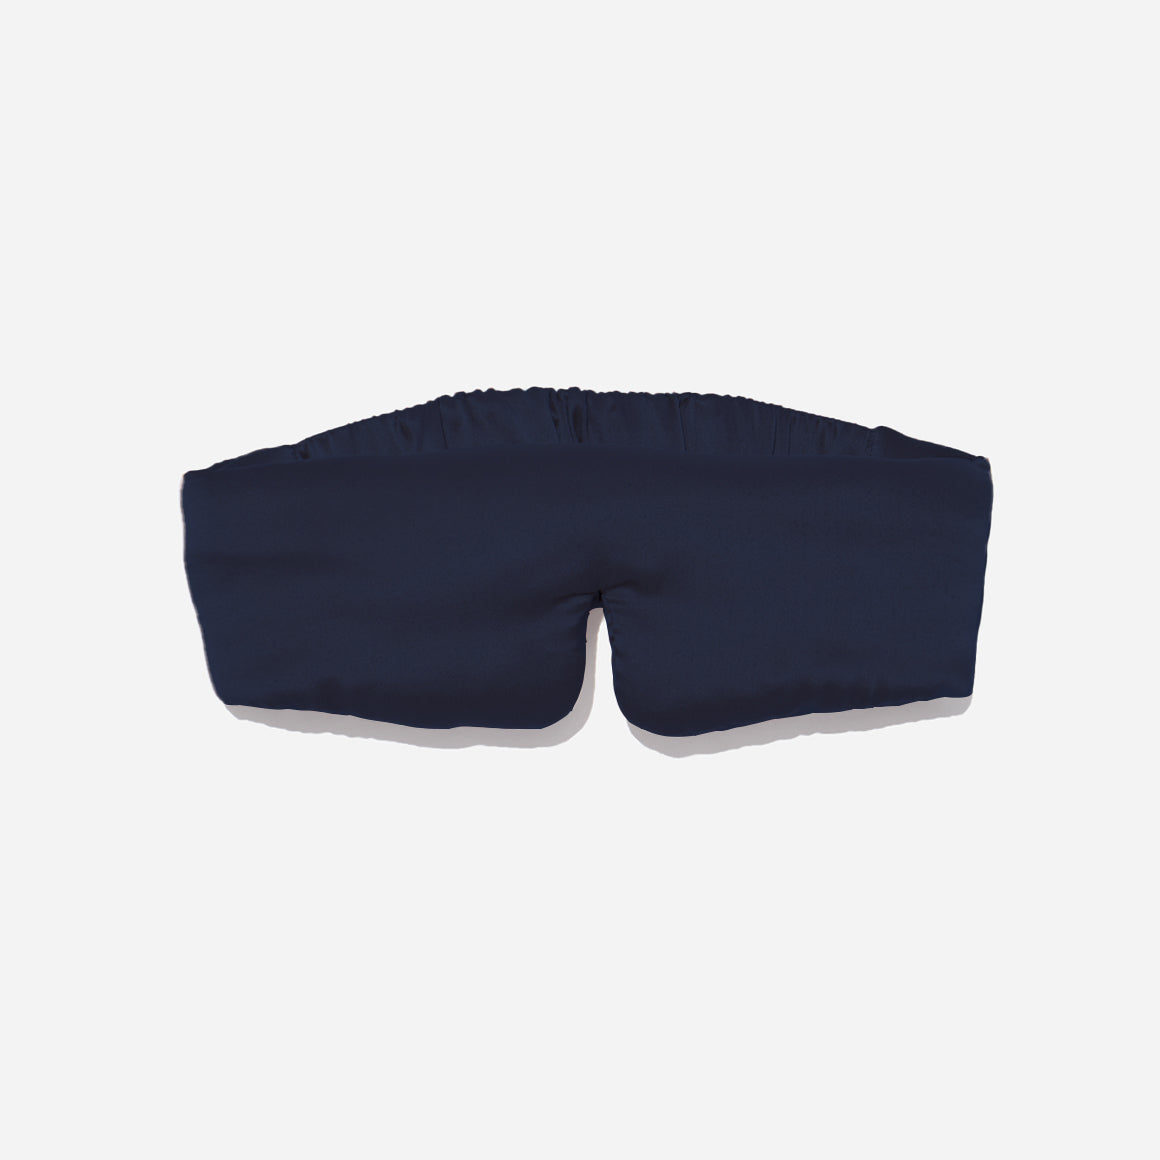 Made from the finest silk, this sleep mask is designed to block out light and provide a comfortable and relaxing sleep environment. The adjustable strap ensures a perfect fit for all head sizes, while the gentle padding around the eye area ensures that the mask doesn't put any pressure on your eyes.